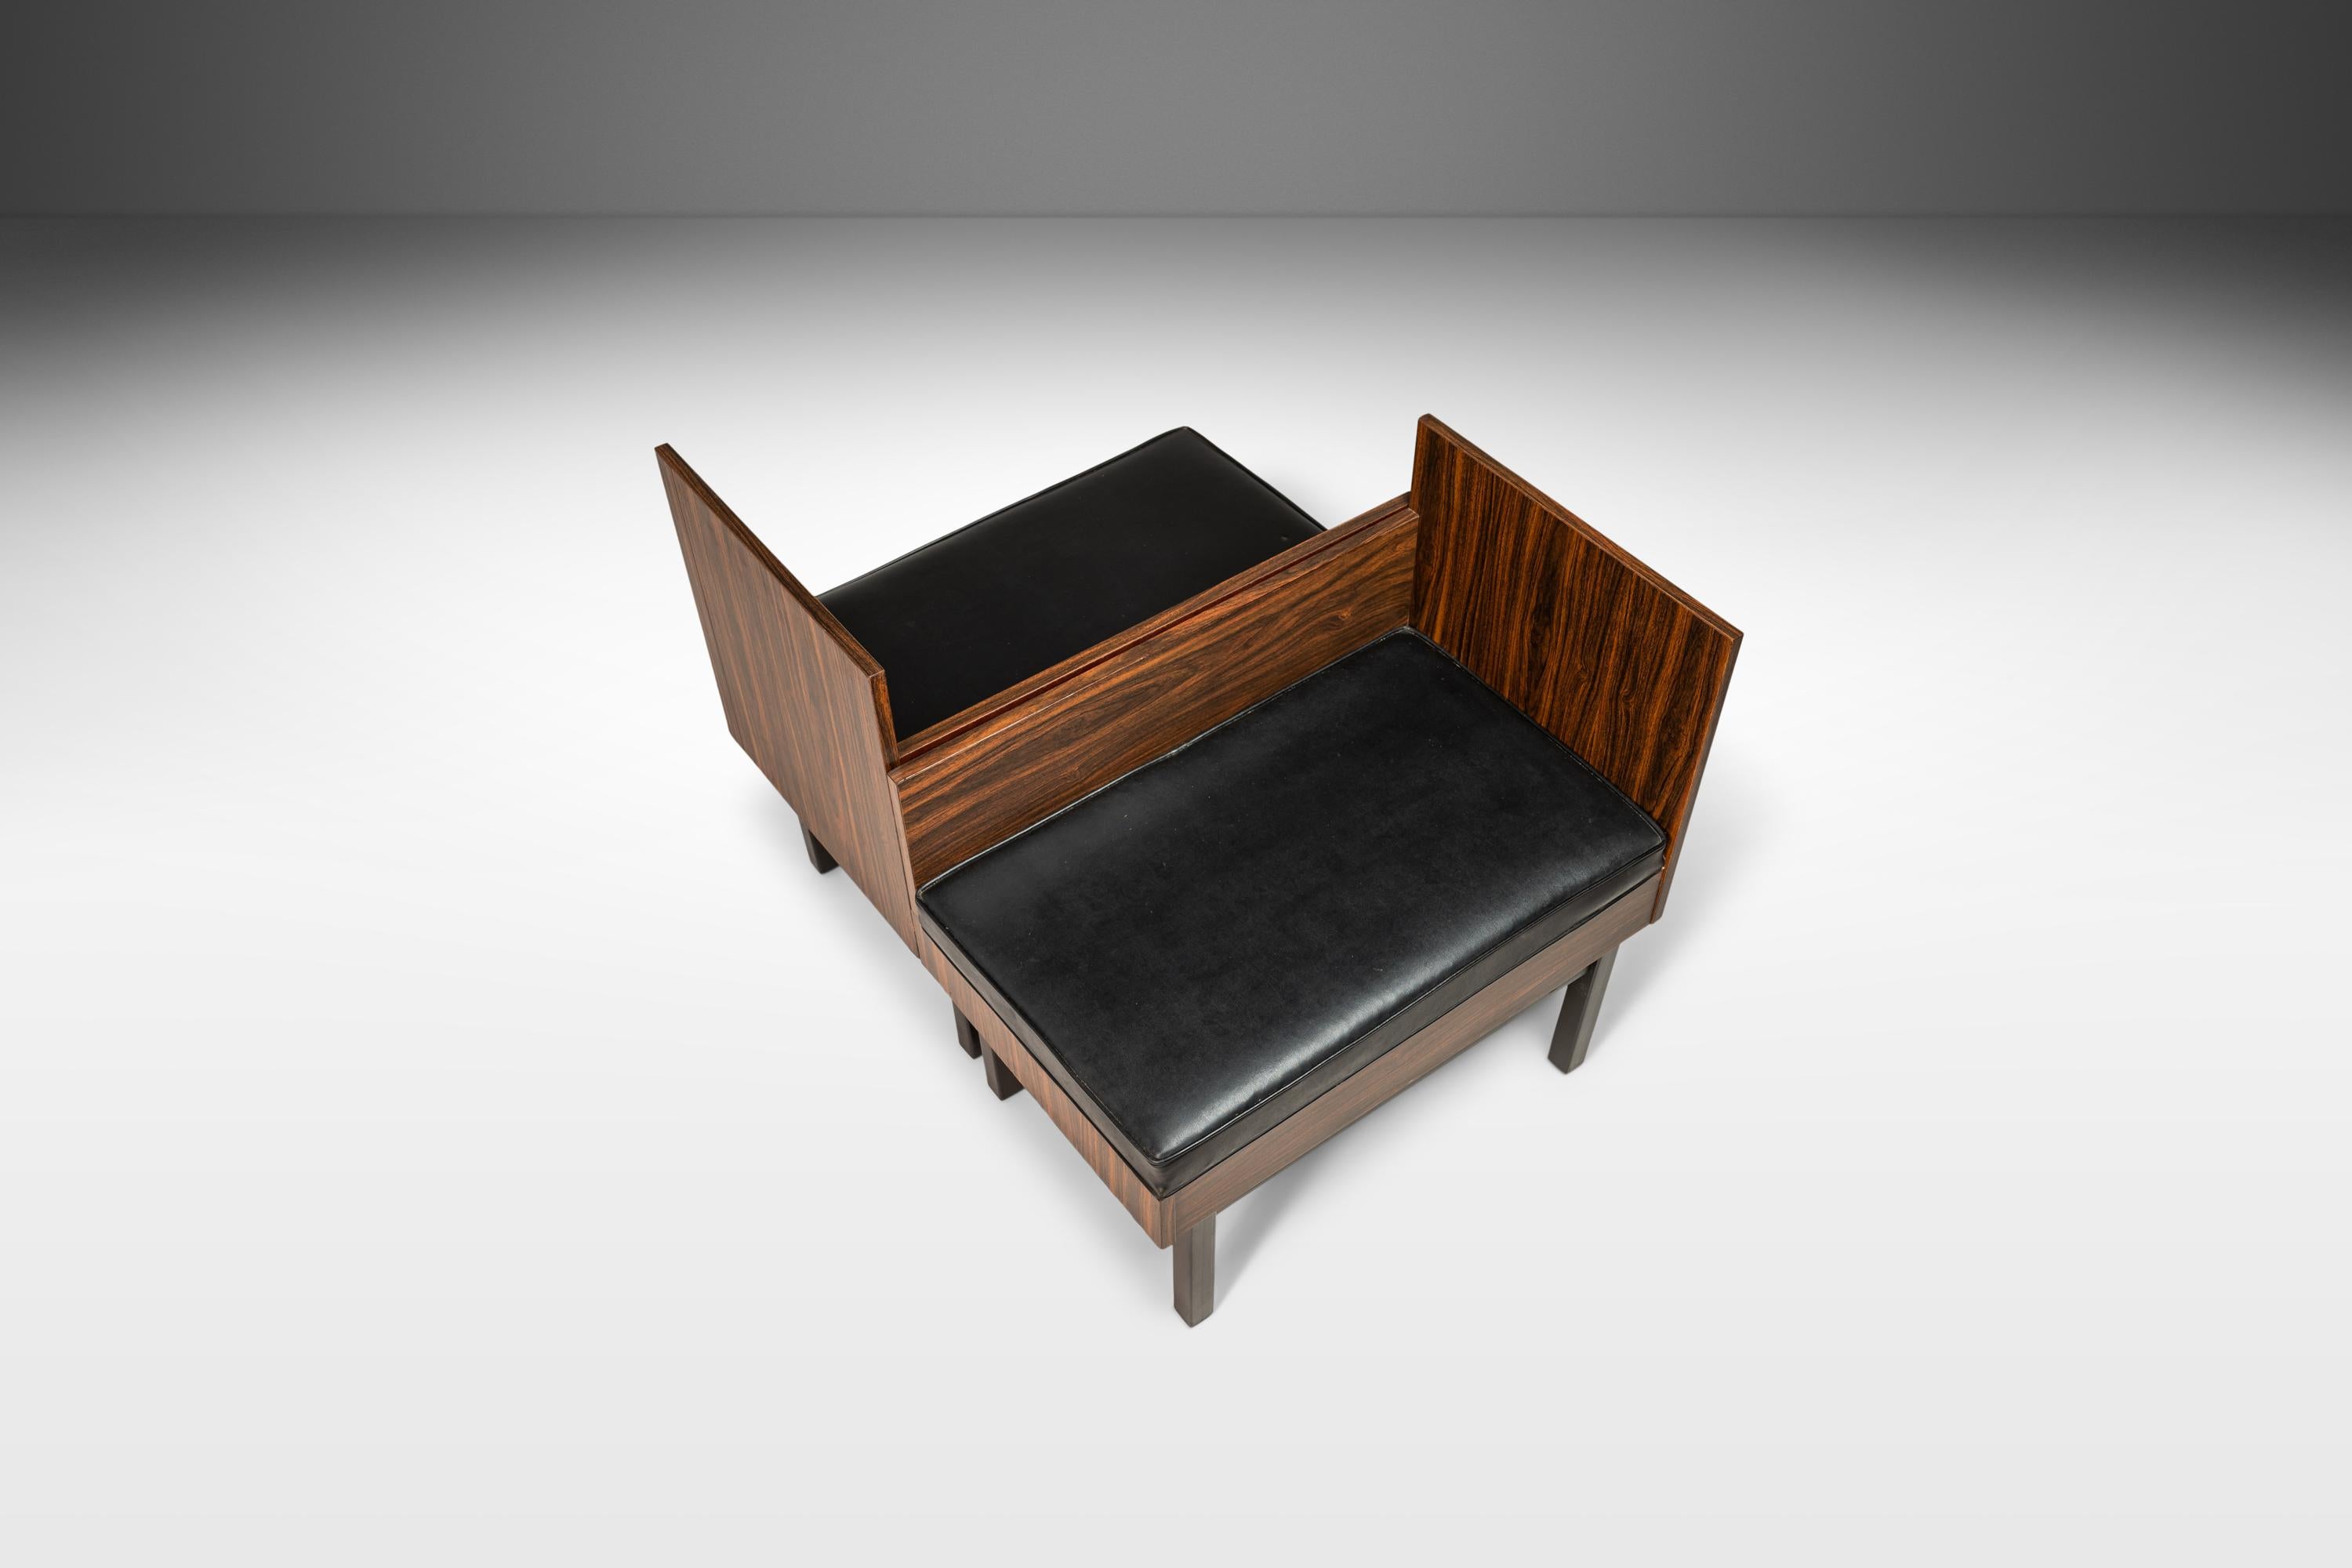 American Set of Two ( 2 ) Modular Benches Kissing Benches in Rosewood Laminate, c. 1950's For Sale